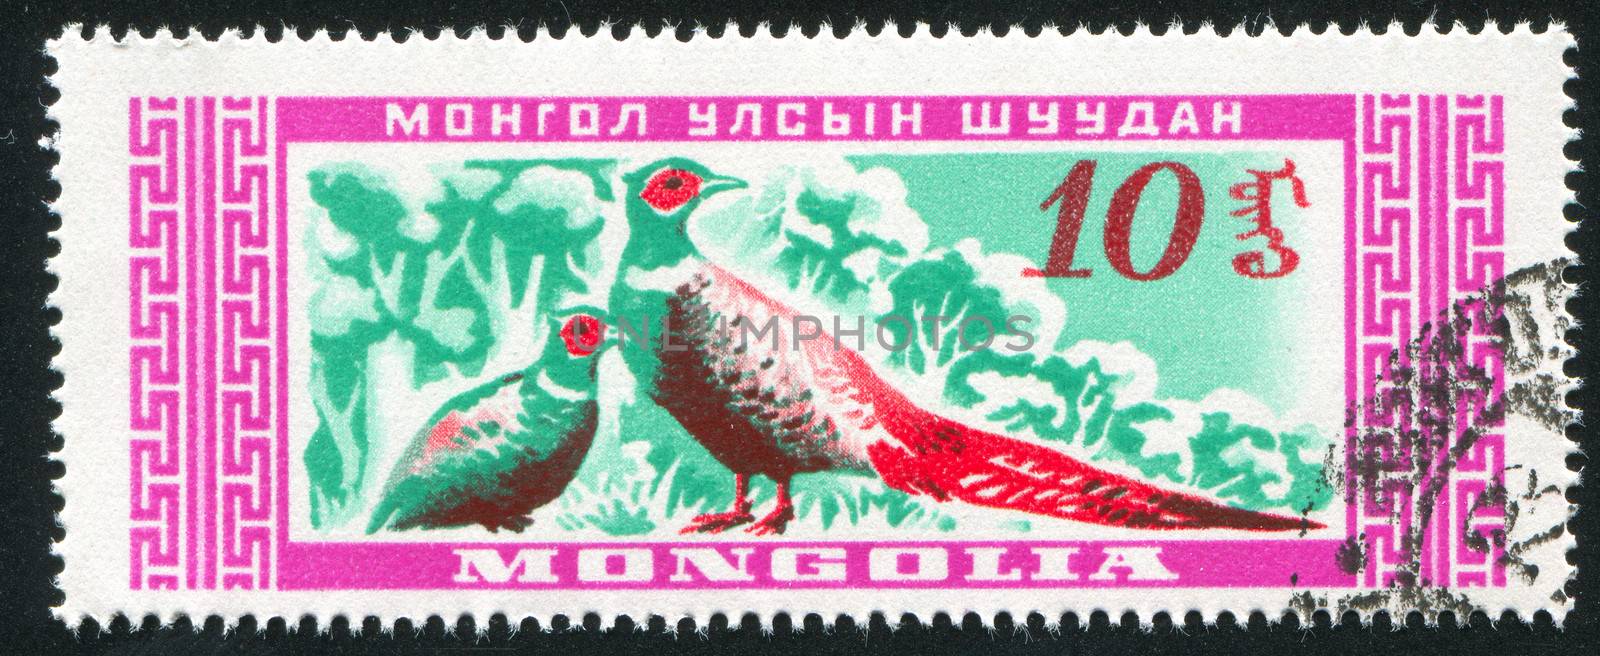 Two Birds pheasant by rook